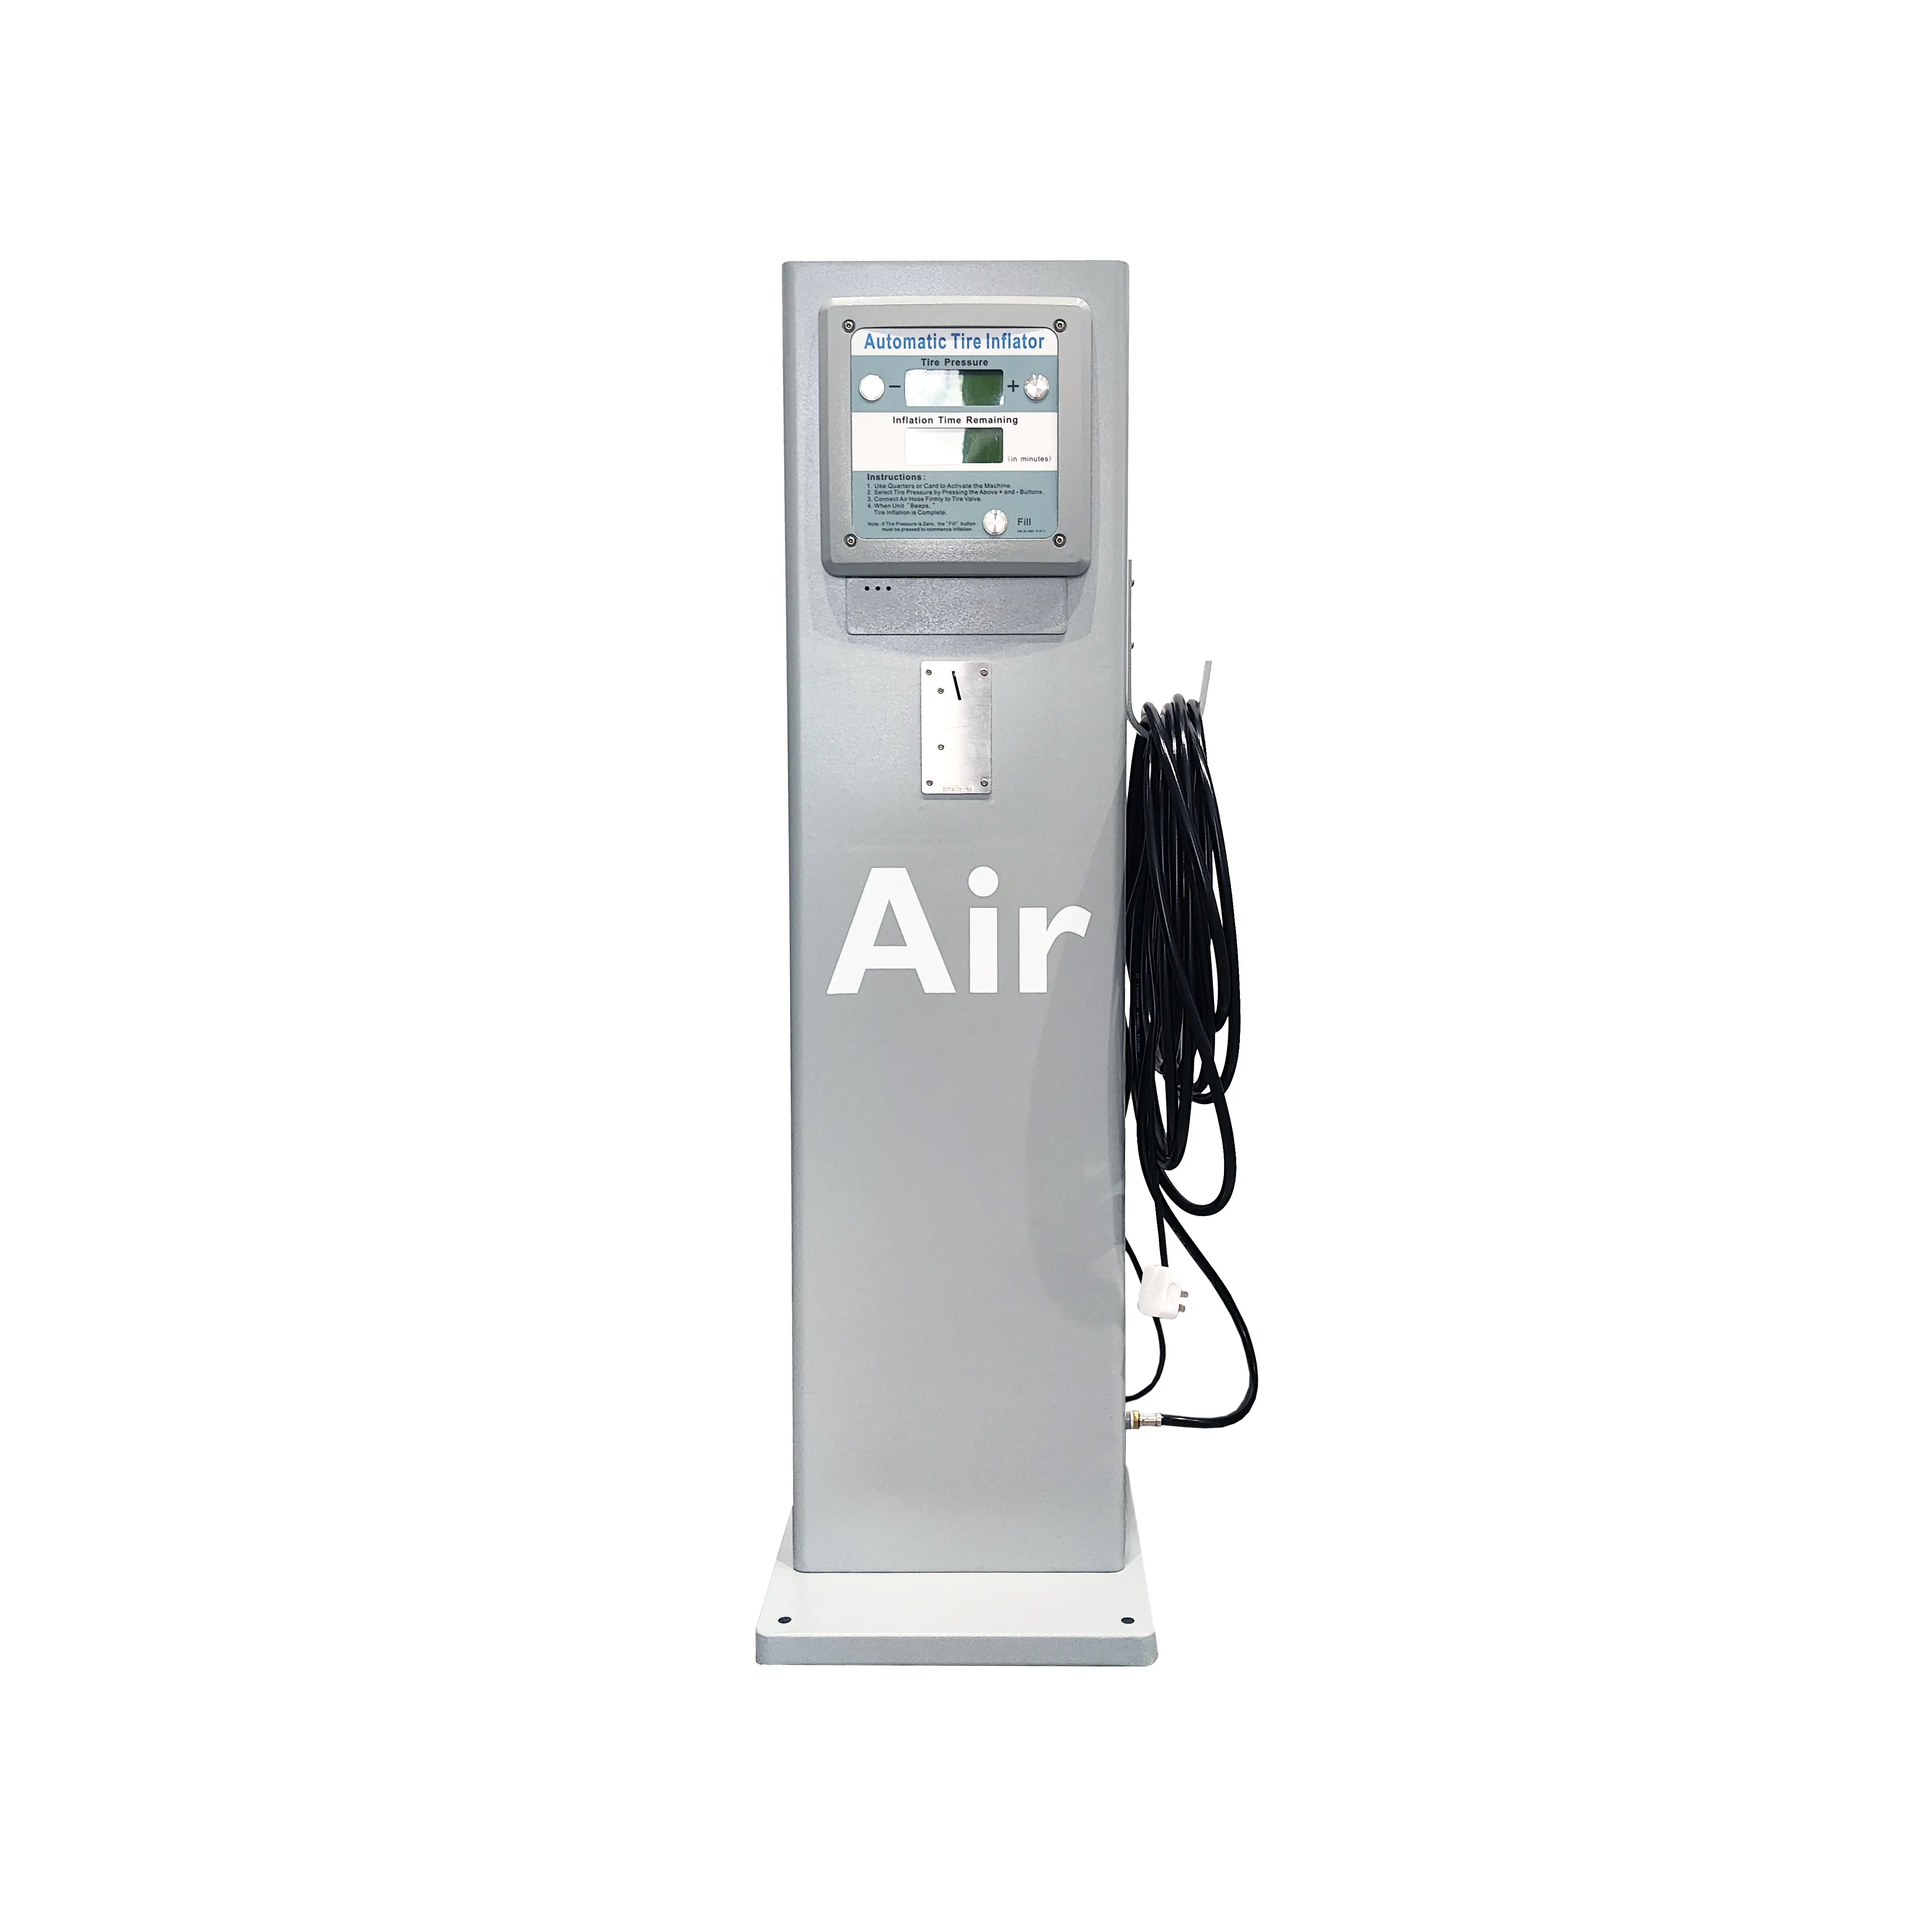 Coin Operated Air Vending Machine Zhuhai Tyres Pressure Gauges Autos Motos Automatic Digital Tire Inflator Gas Station Air Pumps